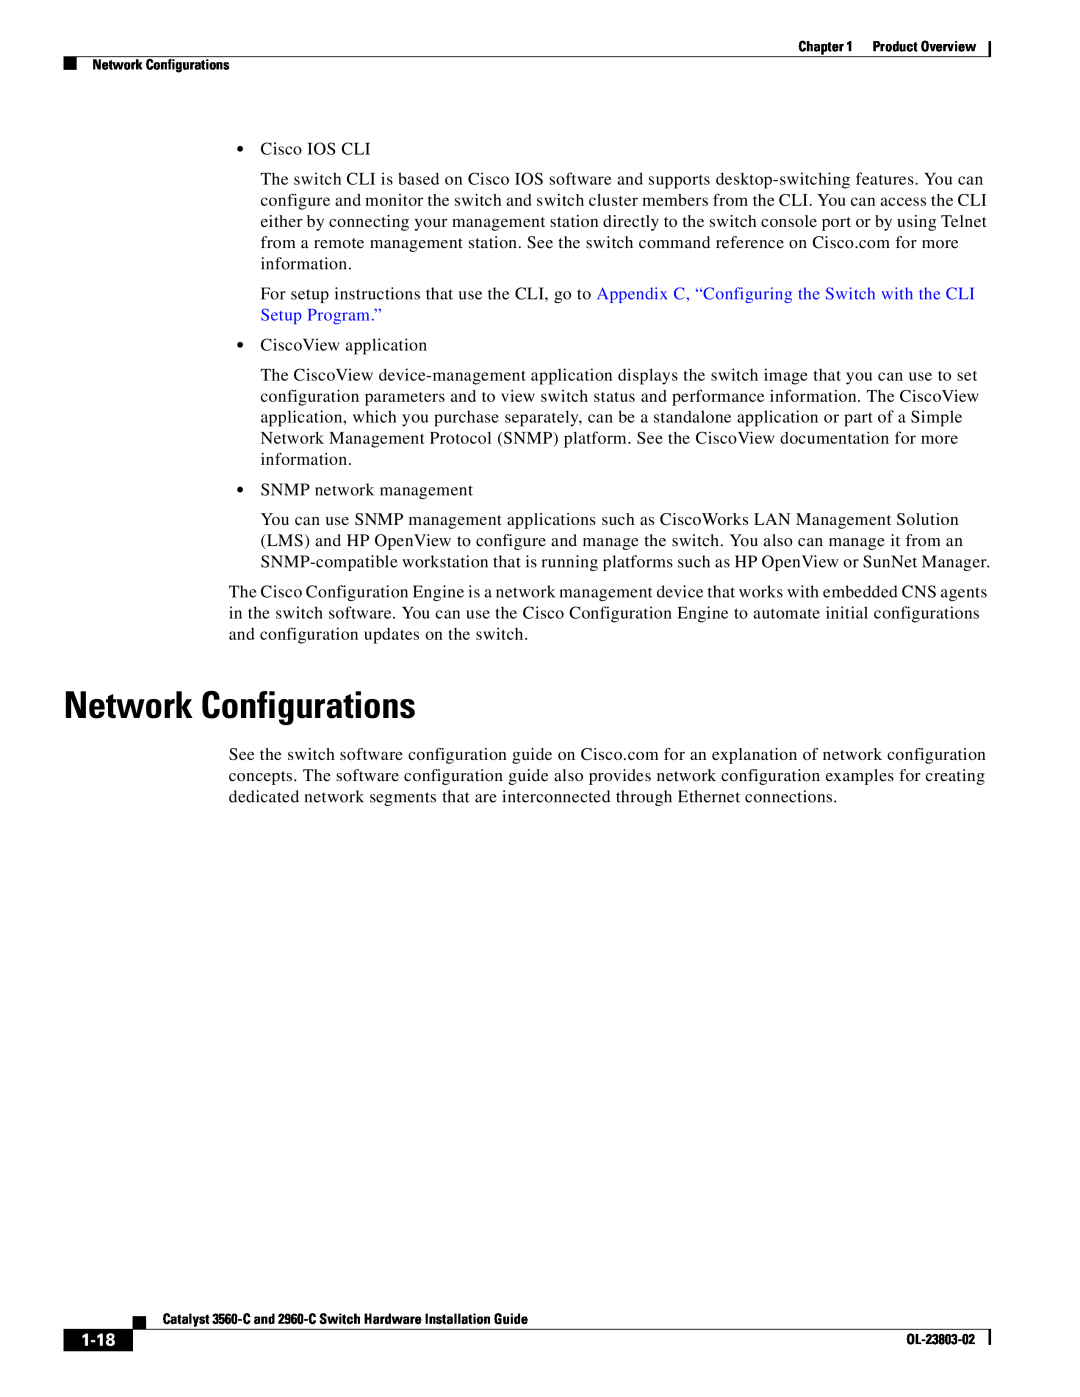 Cisco Systems 3560-C manual Network Configurations, 1-18 